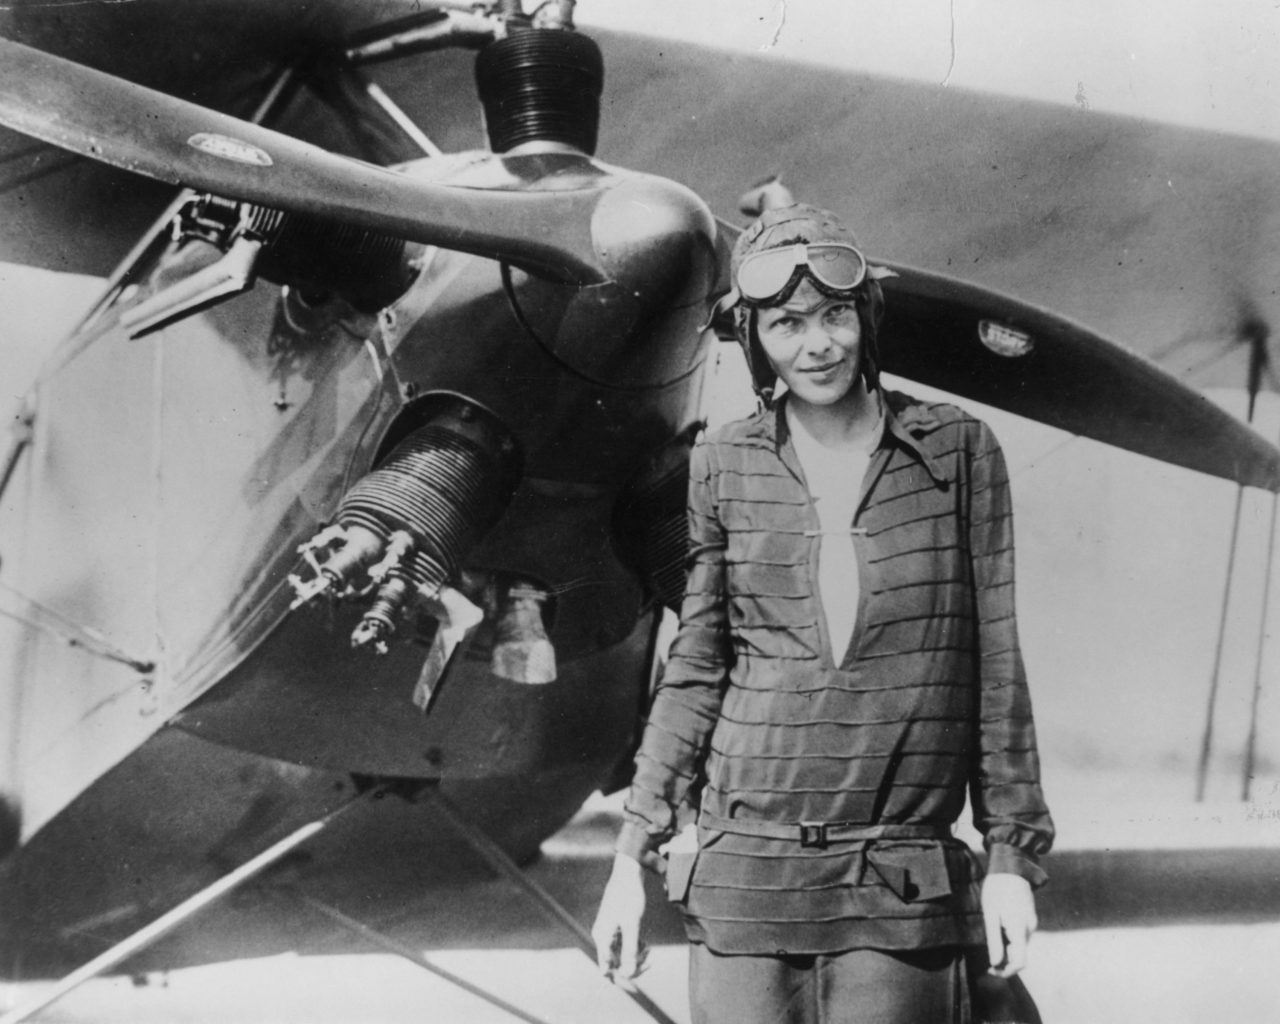 394033 03: (FILE PHOTO) Amelia Earhart stands June 14, 1928 in front of her bi-plane called "Friendship" in Newfoundland. Carlene Mendieta, who is trying to recreate Earhart's 1928 record as the first woman to fly across the US and back again, left Rye, NY on September 5, 2001. Earhart (1898 - 1937) disappeared without trace over the Pacific Ocean in her attempt to fly around the world in 1937. (Photo by Getty Images)